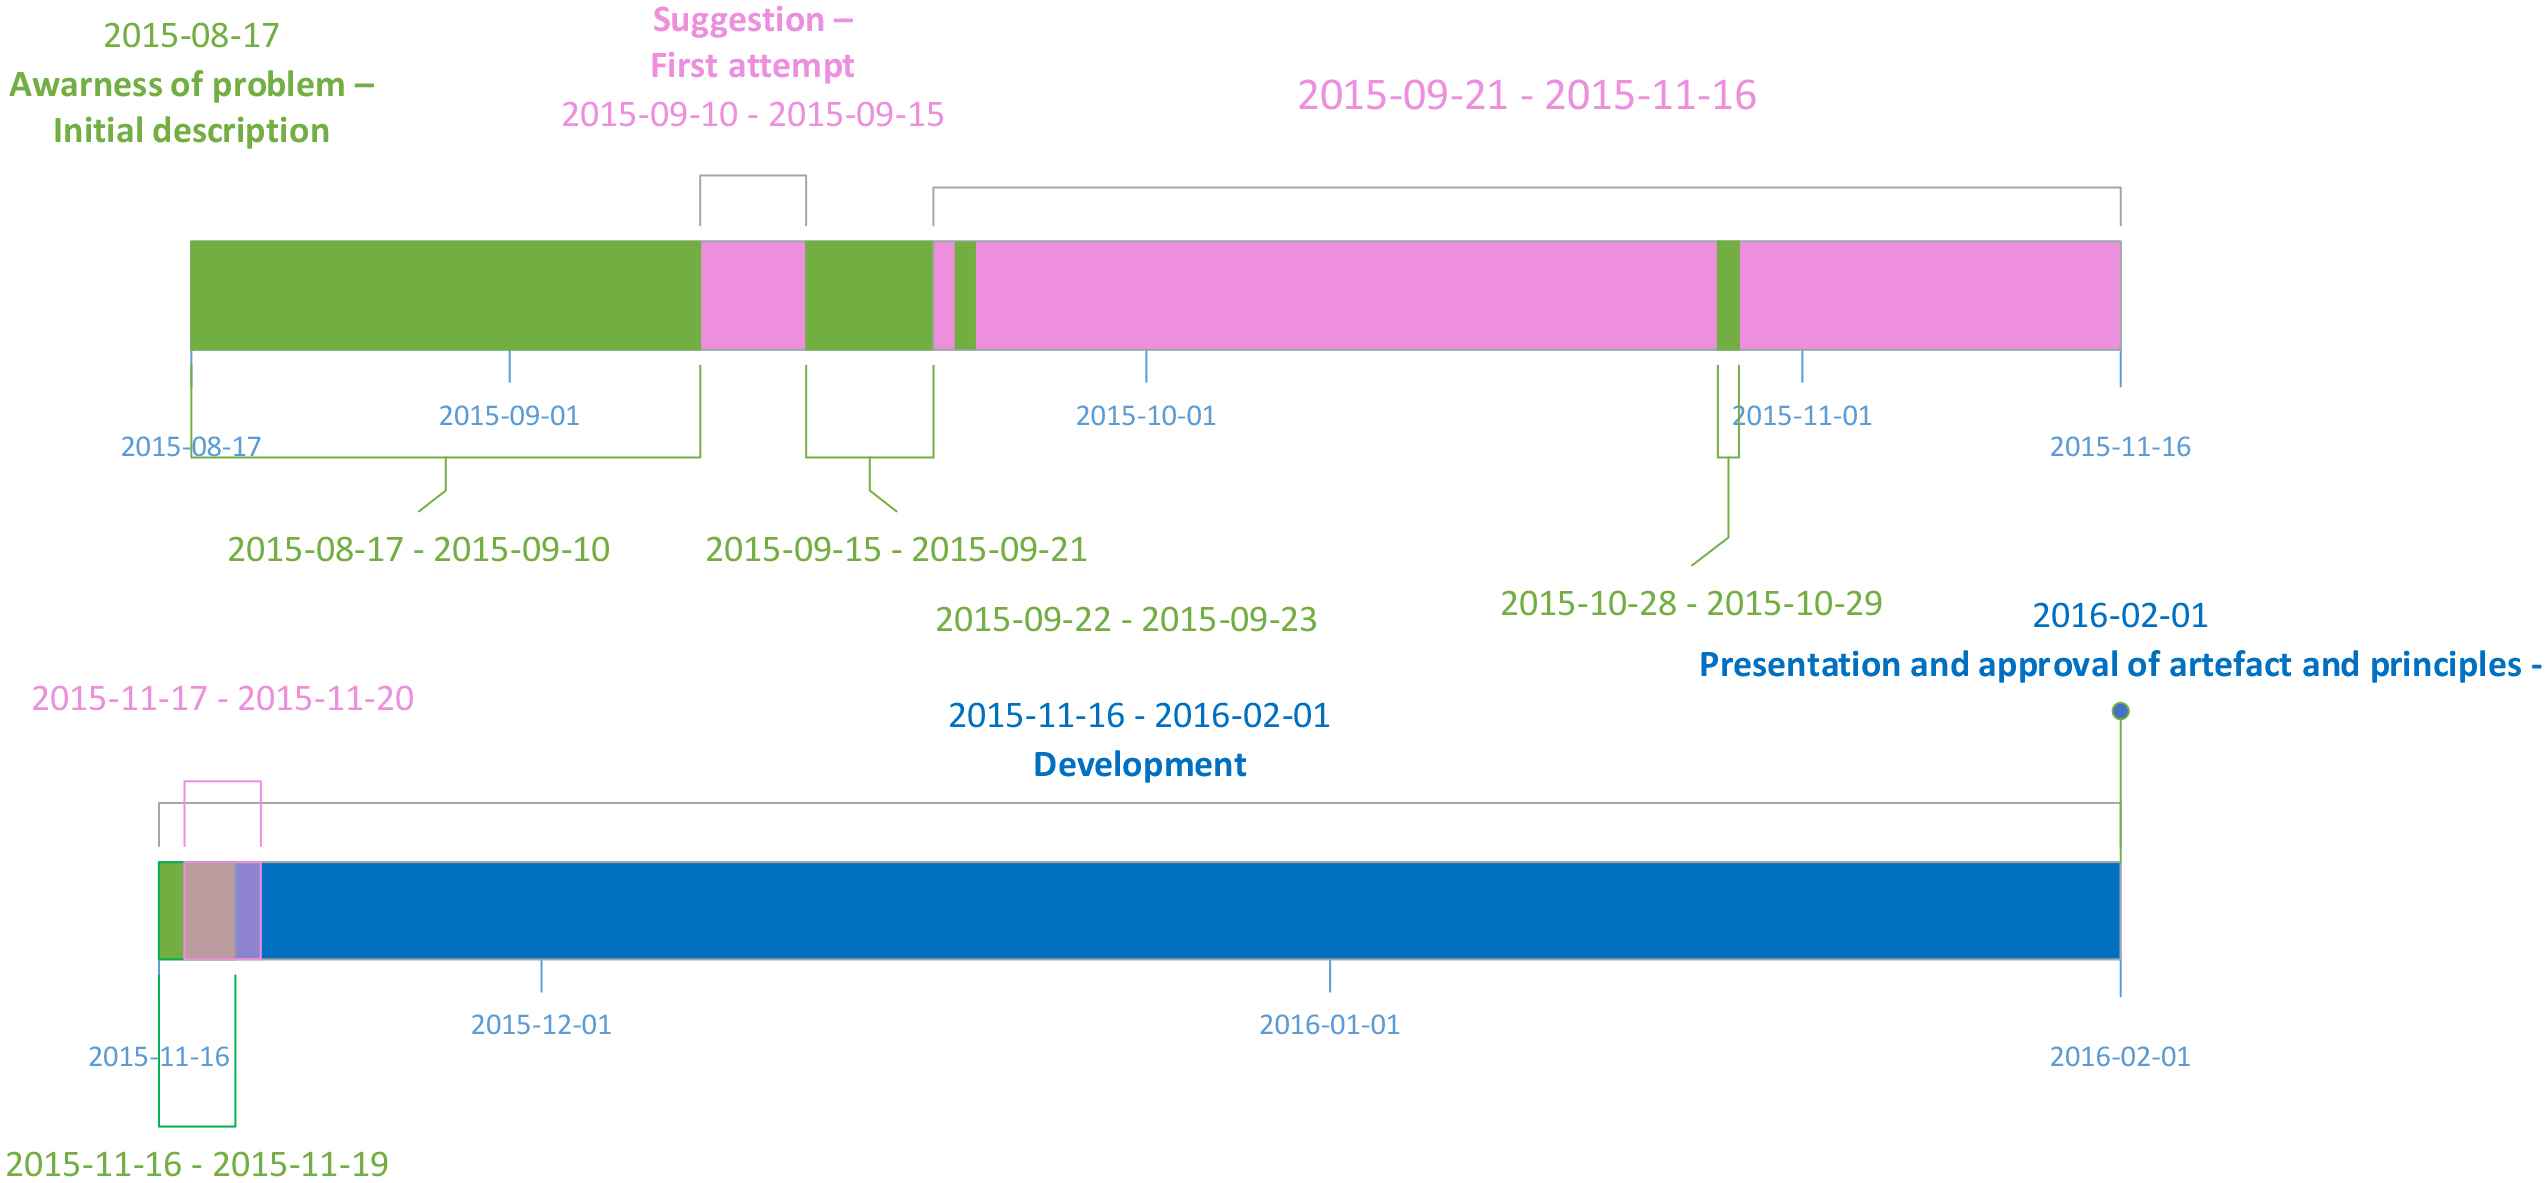 Timeline of the various phases of awareness of the problem, suggestion and development.